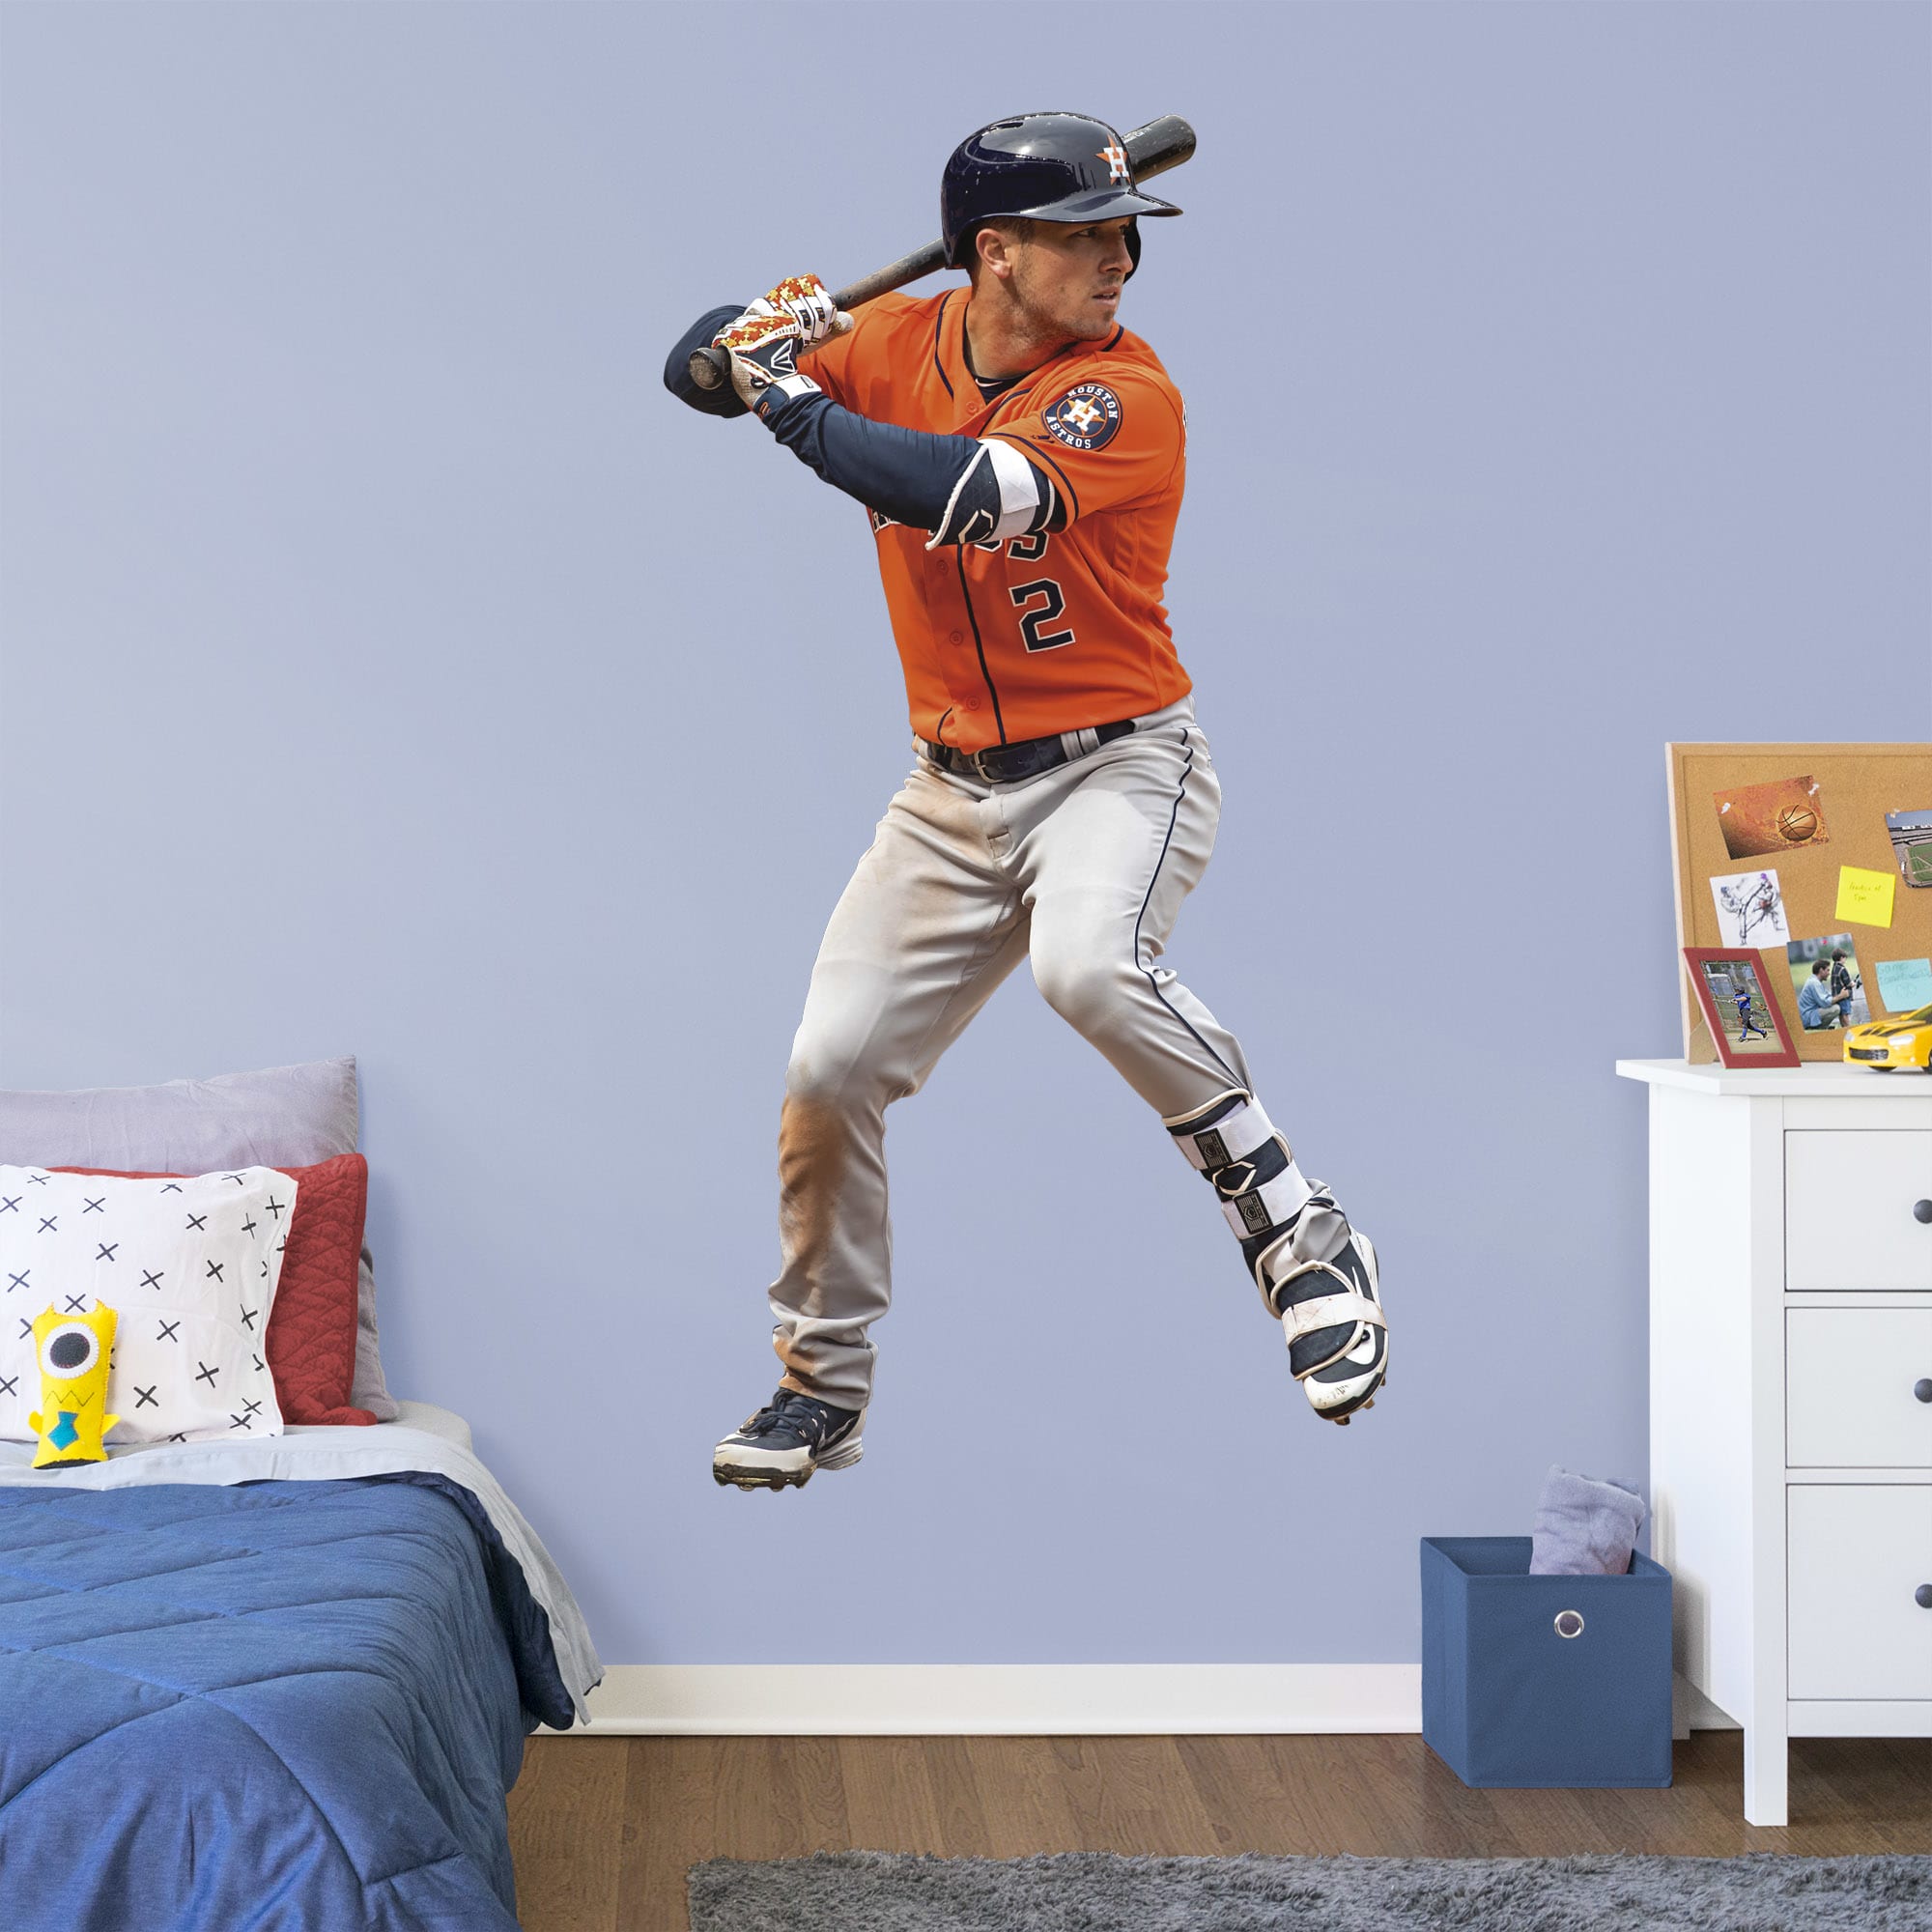 Alex Bregman for Houston Astros - Officially Licensed MLB Removable Wall Decal Life-Size Athlete + 2 Decals (39"W x 75"H) by Fat